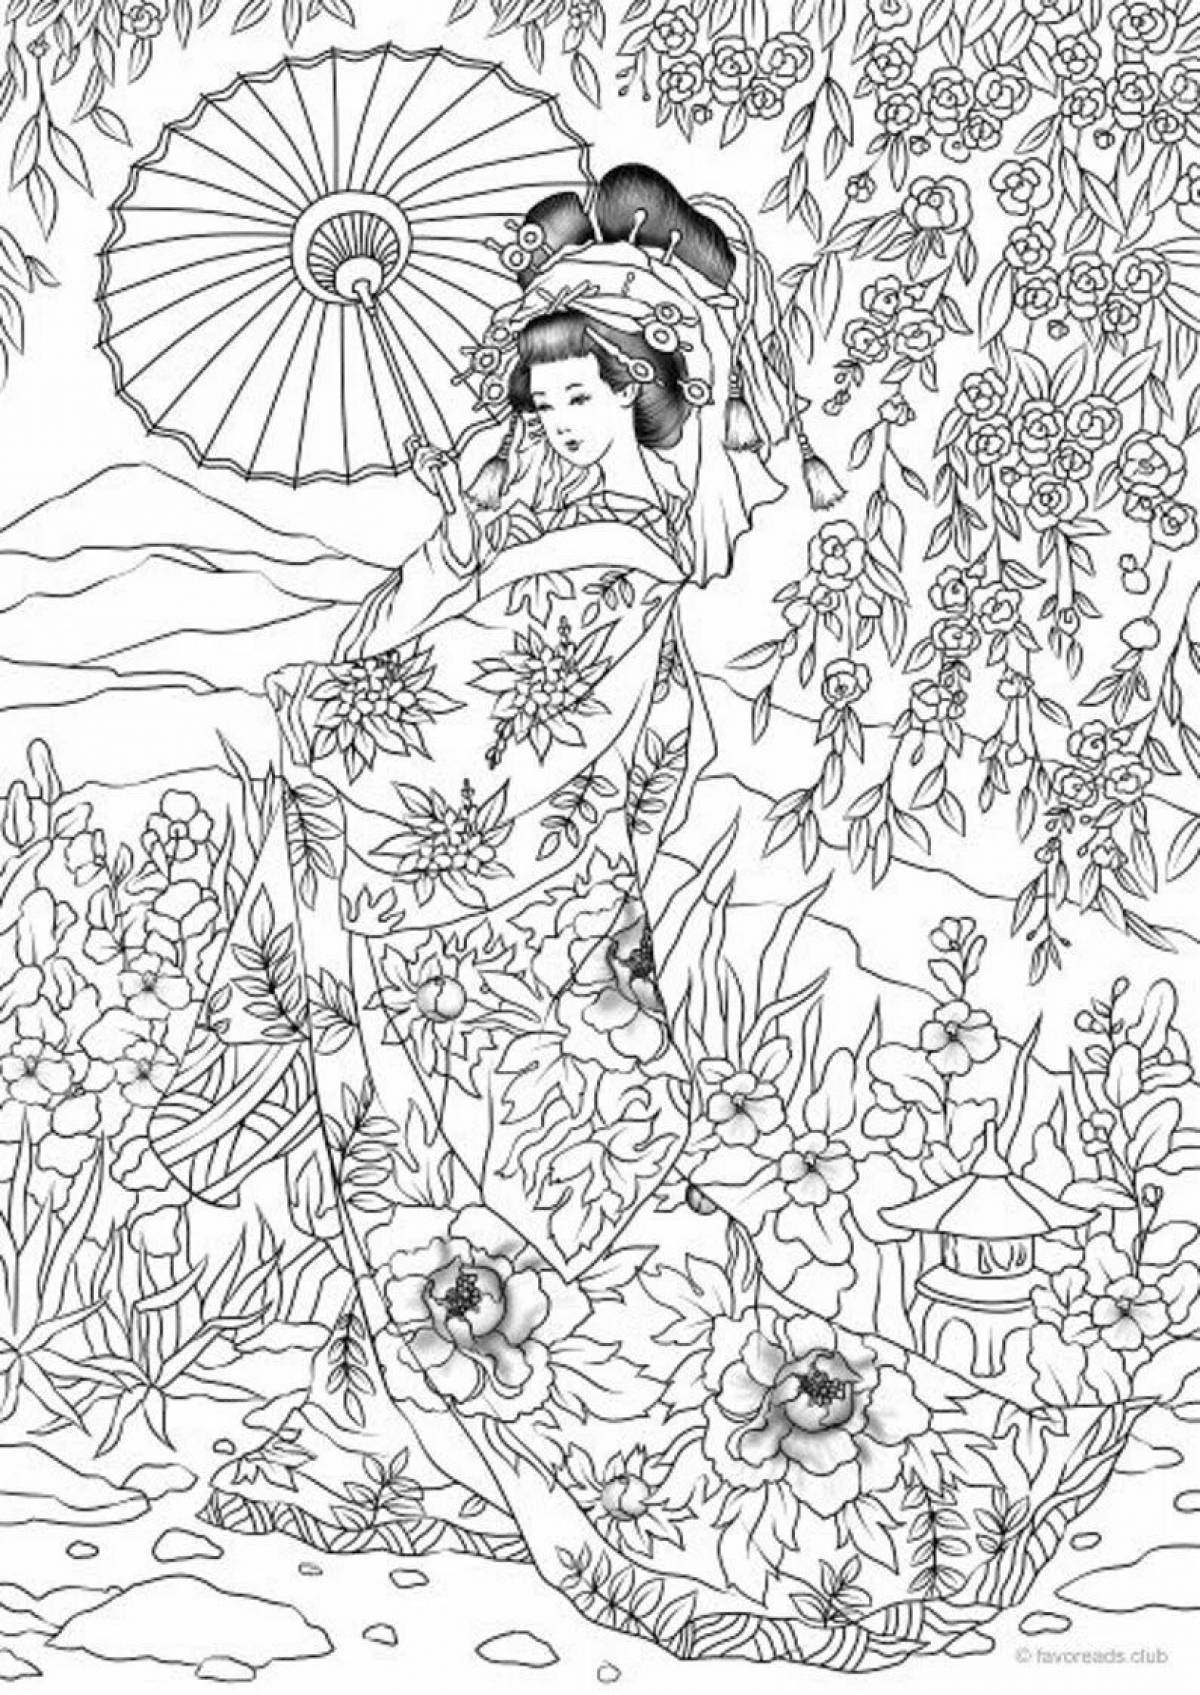 Fun coloring book with Chinese motifs